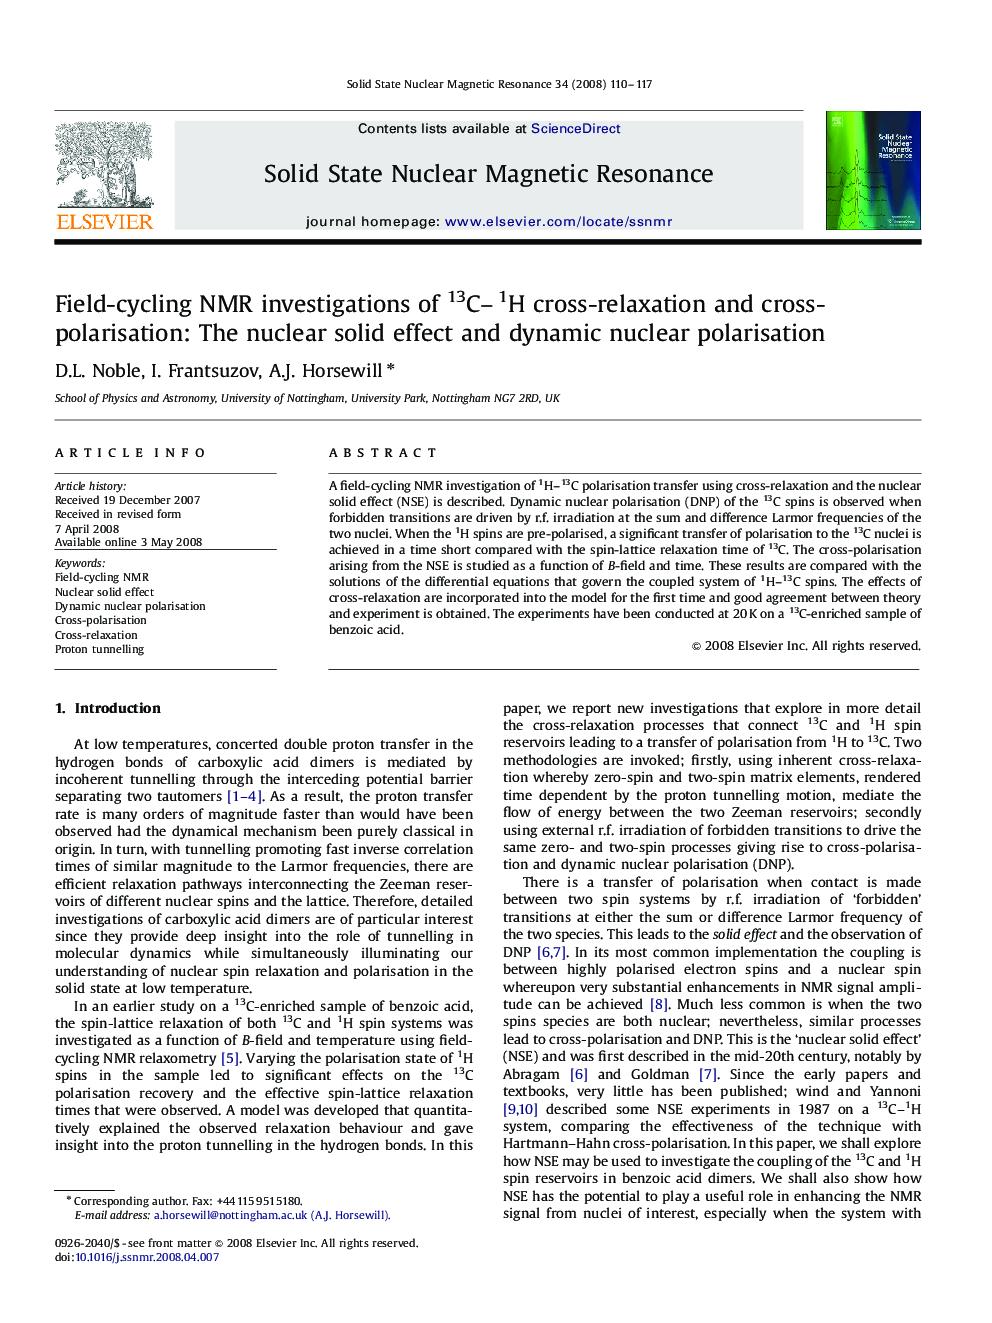 Field-cycling NMR investigations of 13C-1H cross-relaxation and cross-polarisation: The nuclear solid effect and dynamic nuclear polarisation